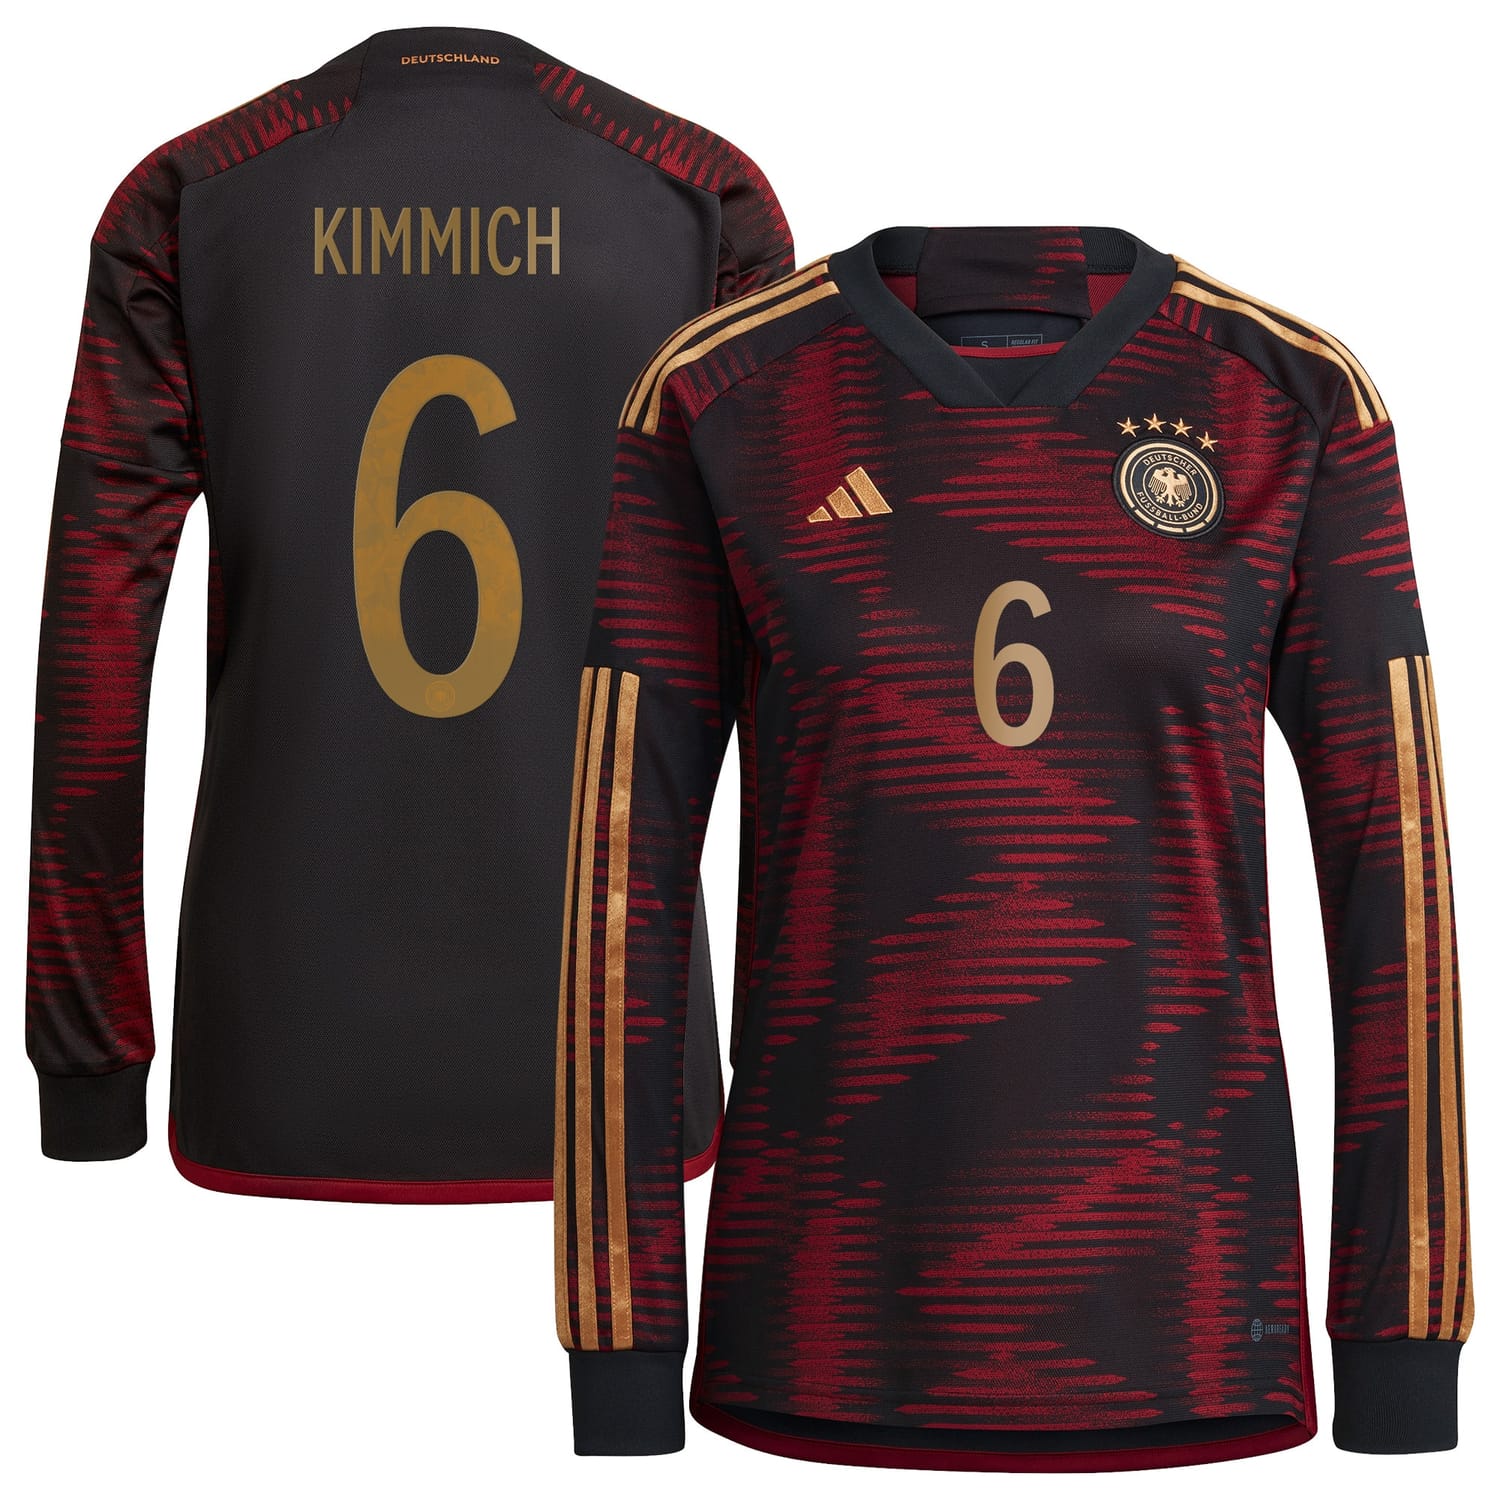 Germany National Team Away Jersey Shirt Long Sleeve player Joshua Kimmich 6 printing for Women